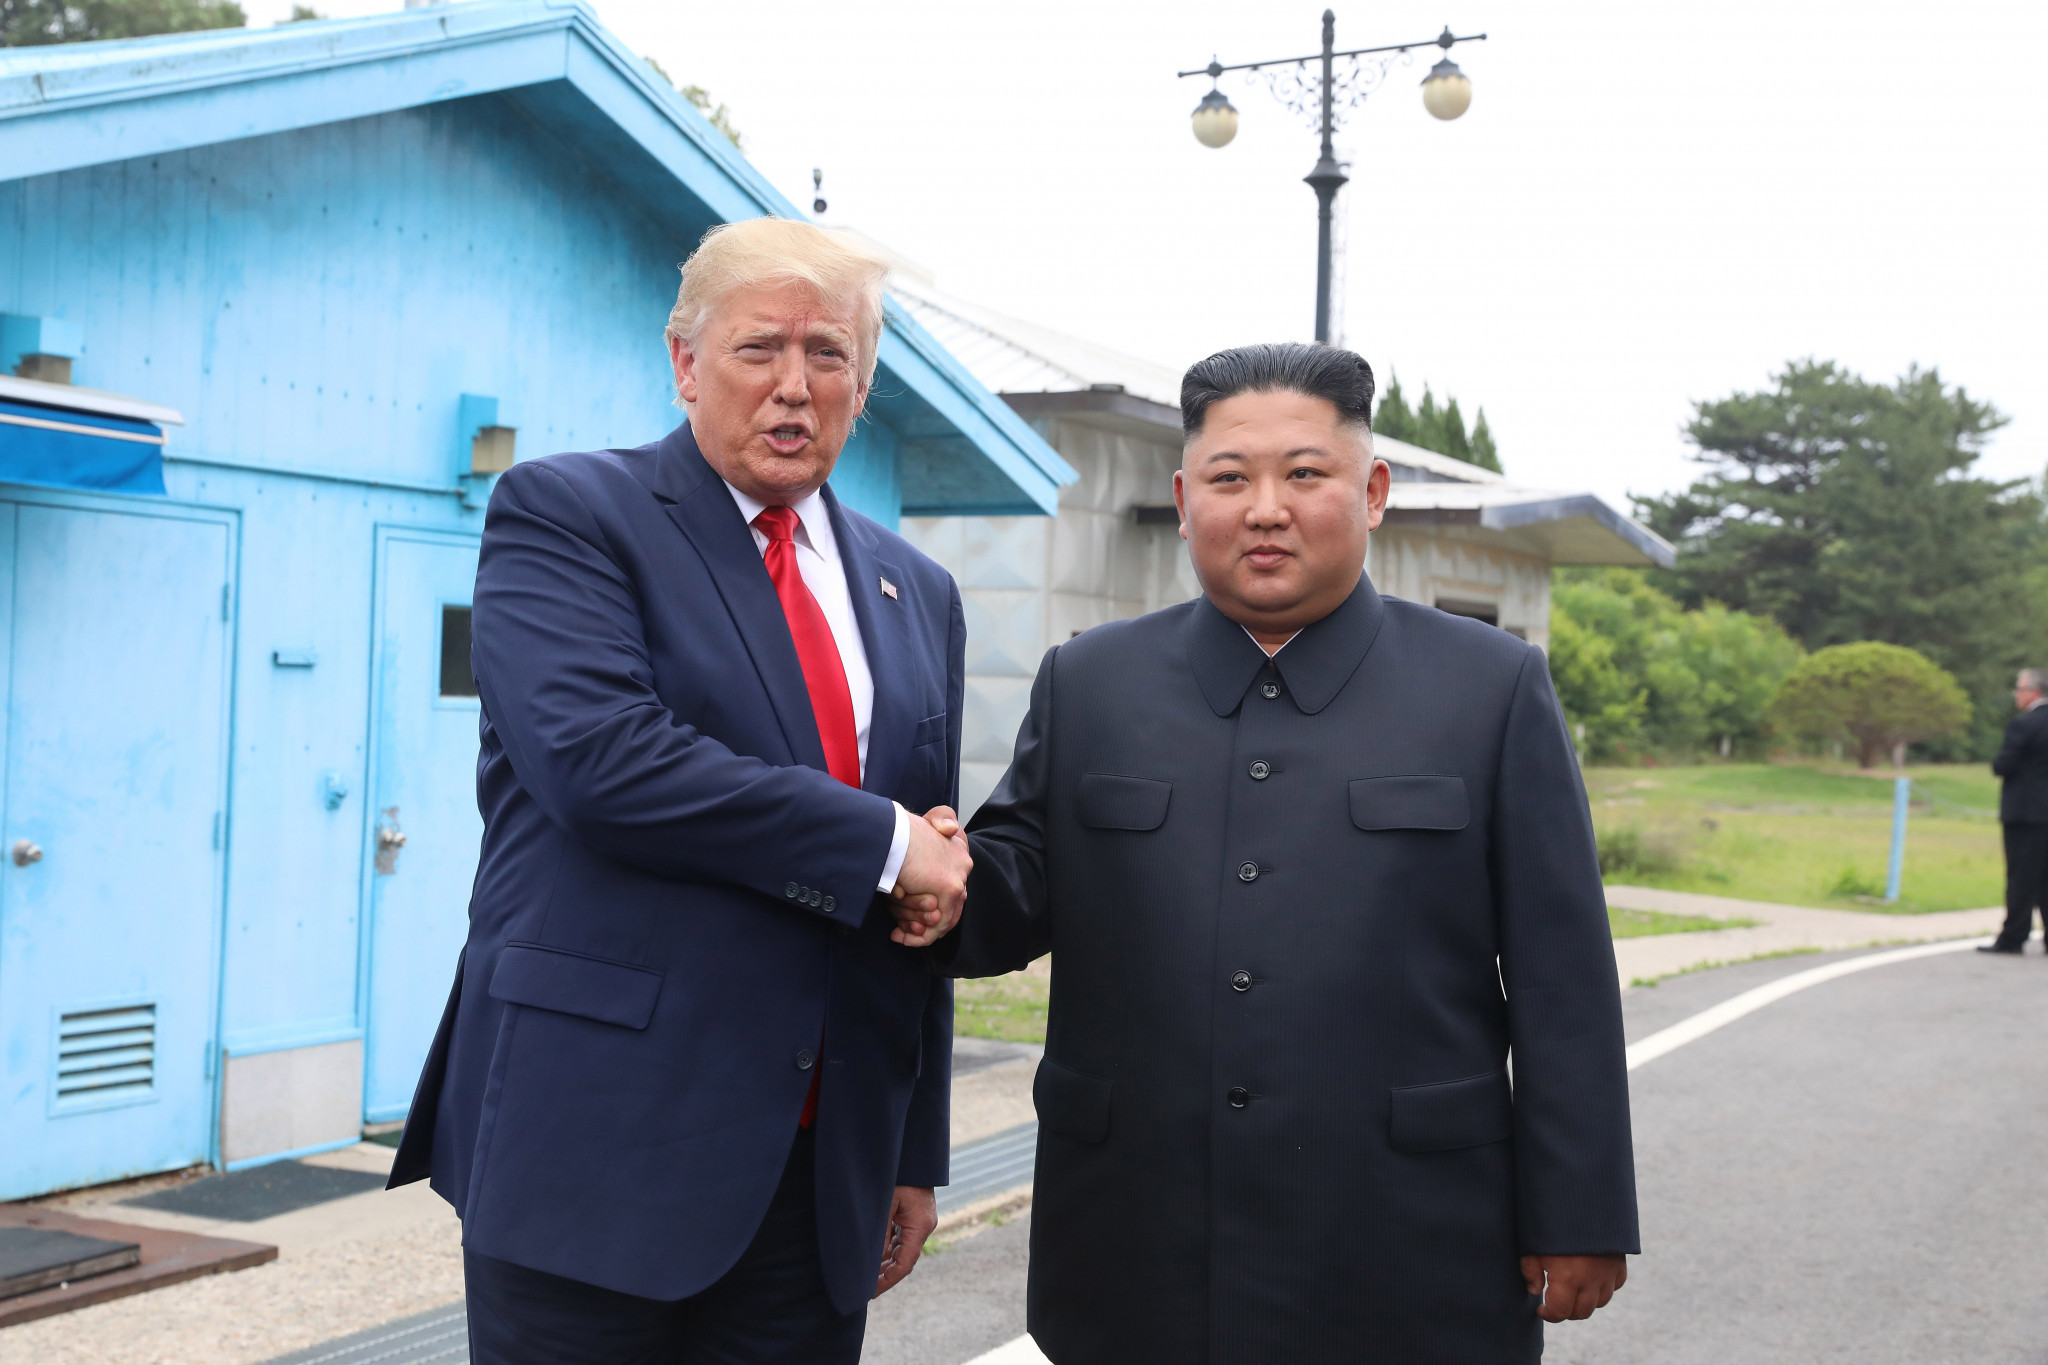 Donald Trump's impromptu summit with North Korean Leader Kim Jong Un has given fresh impetus to the joint bid between Pyongyang and Seoul for the 2032 Olympic Games ©Getty Images